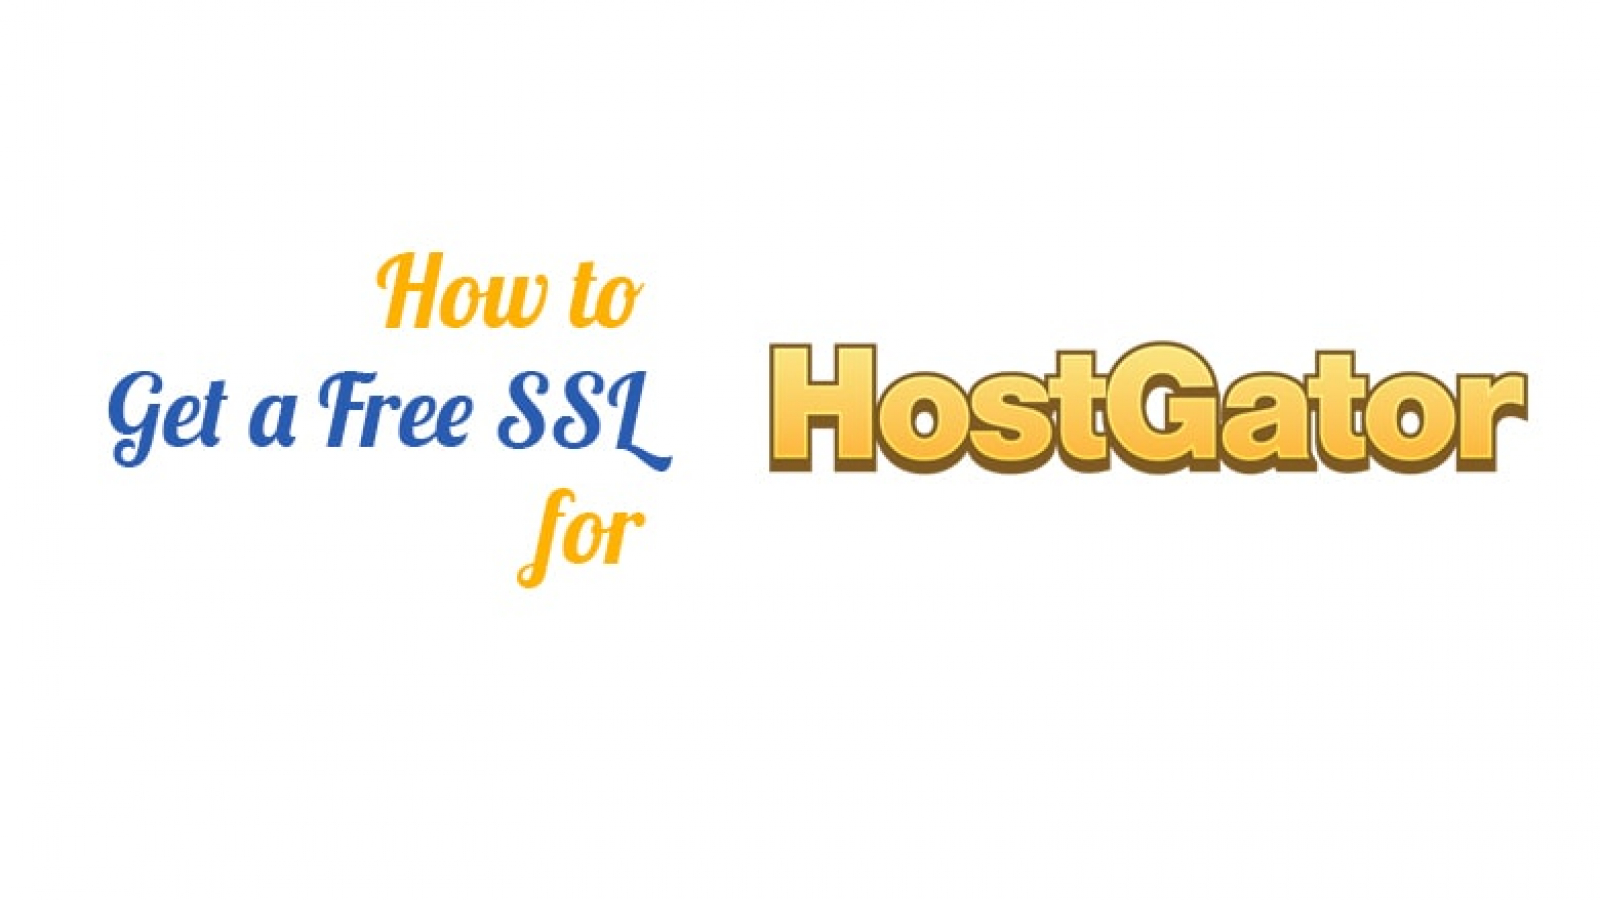 how-to-get-a-free-ssl-for-hostgator-featured-min